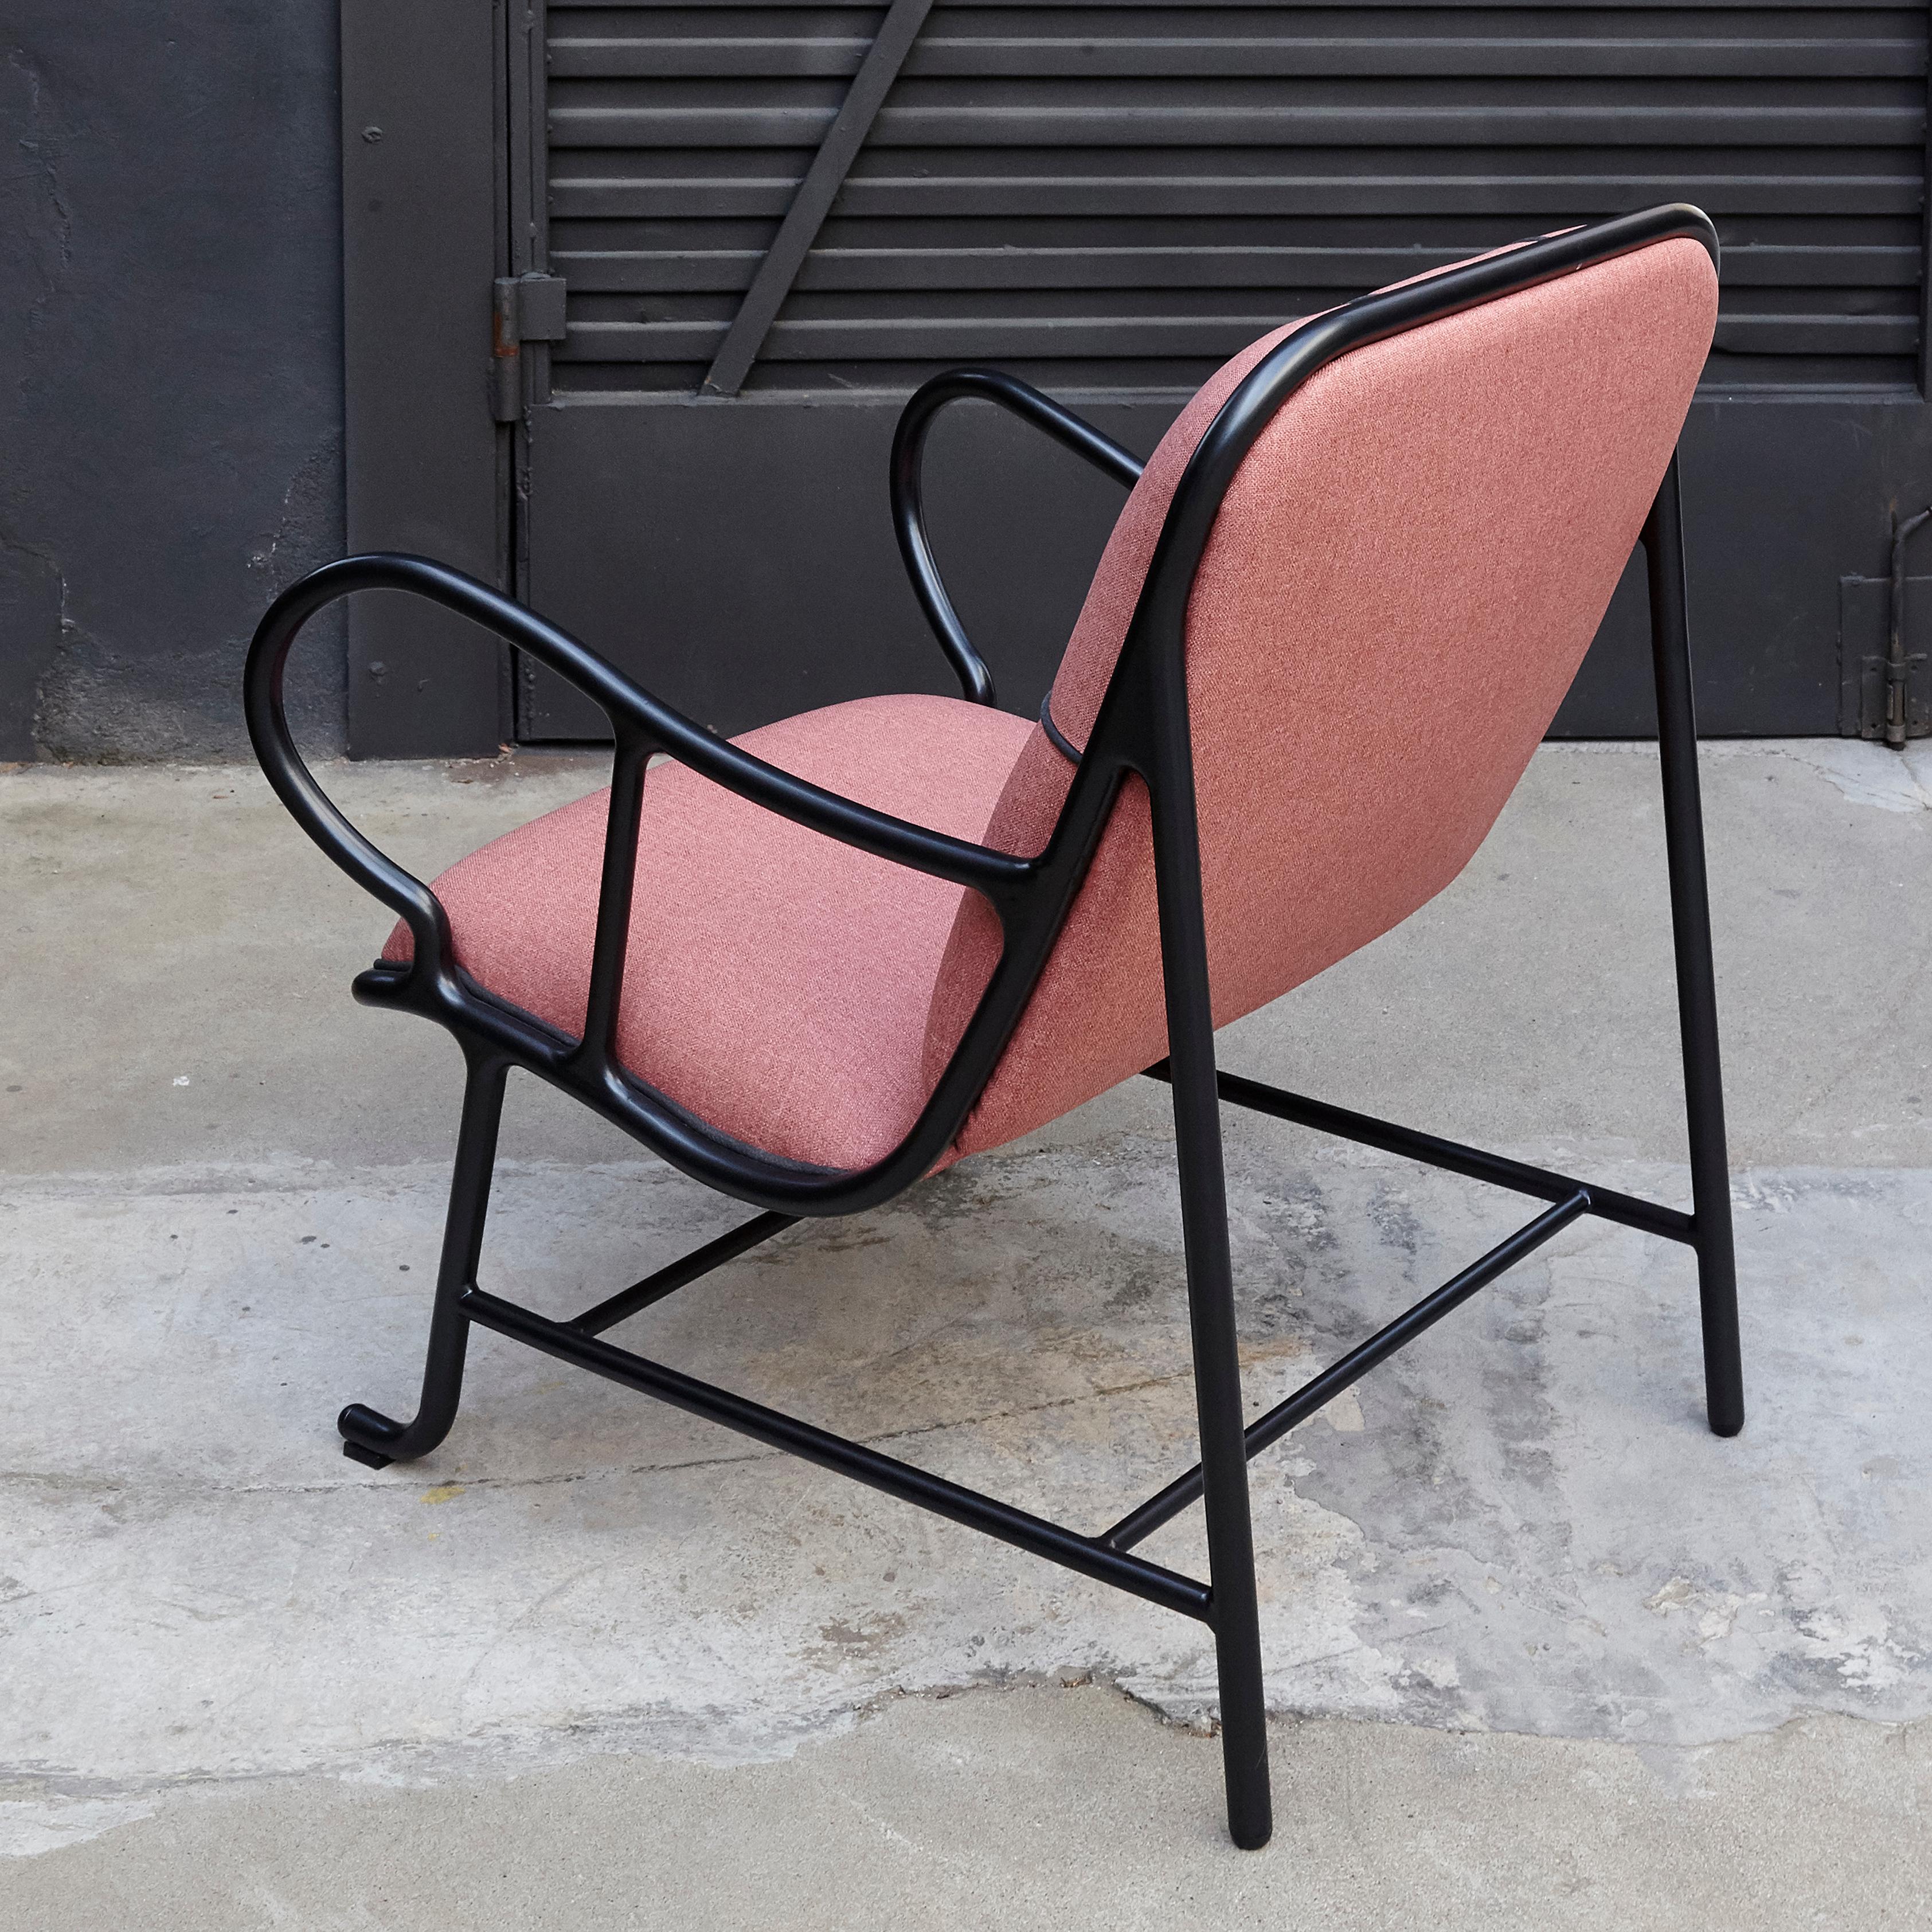 Gardenias Indor Armchair by Jaime Hayon In New Condition For Sale In Barcelona, Barcelona